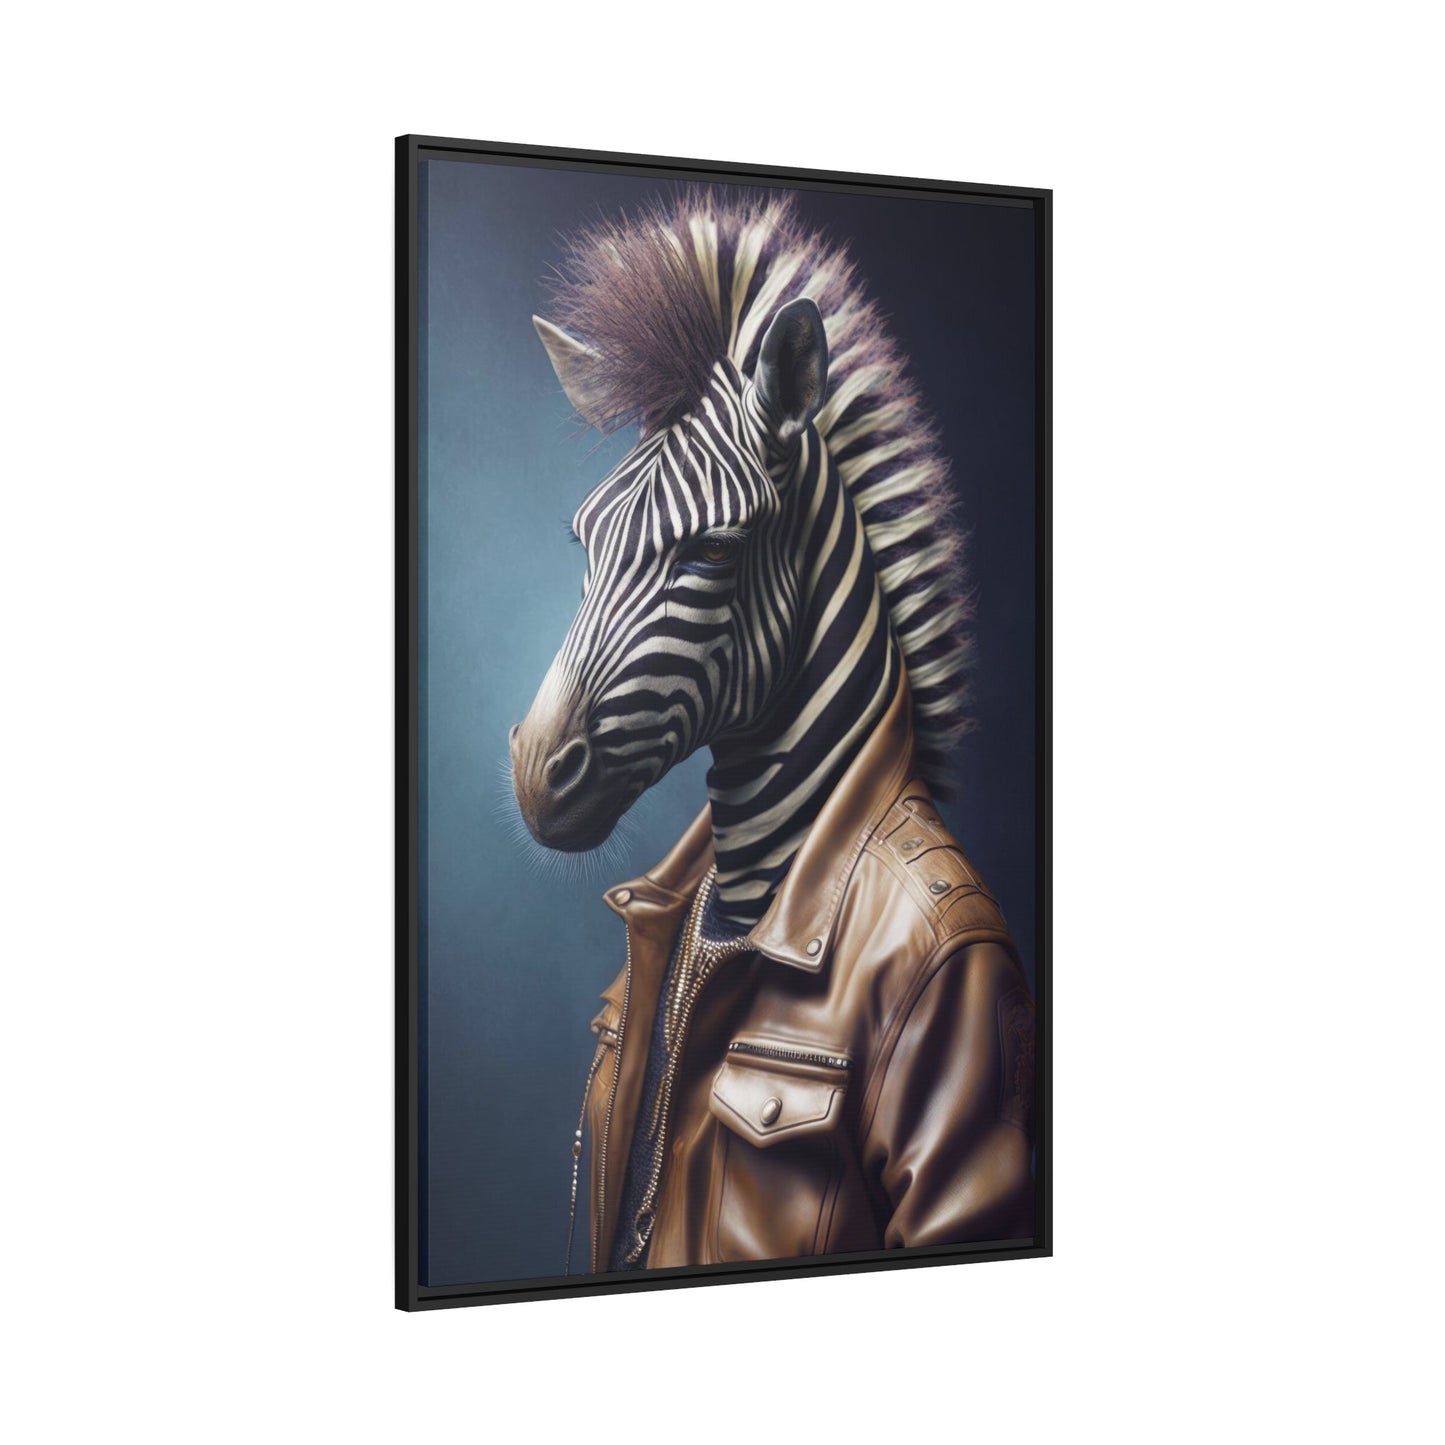 African Dreams: Wall Art Depicting the Grace and Strength of a Zebra